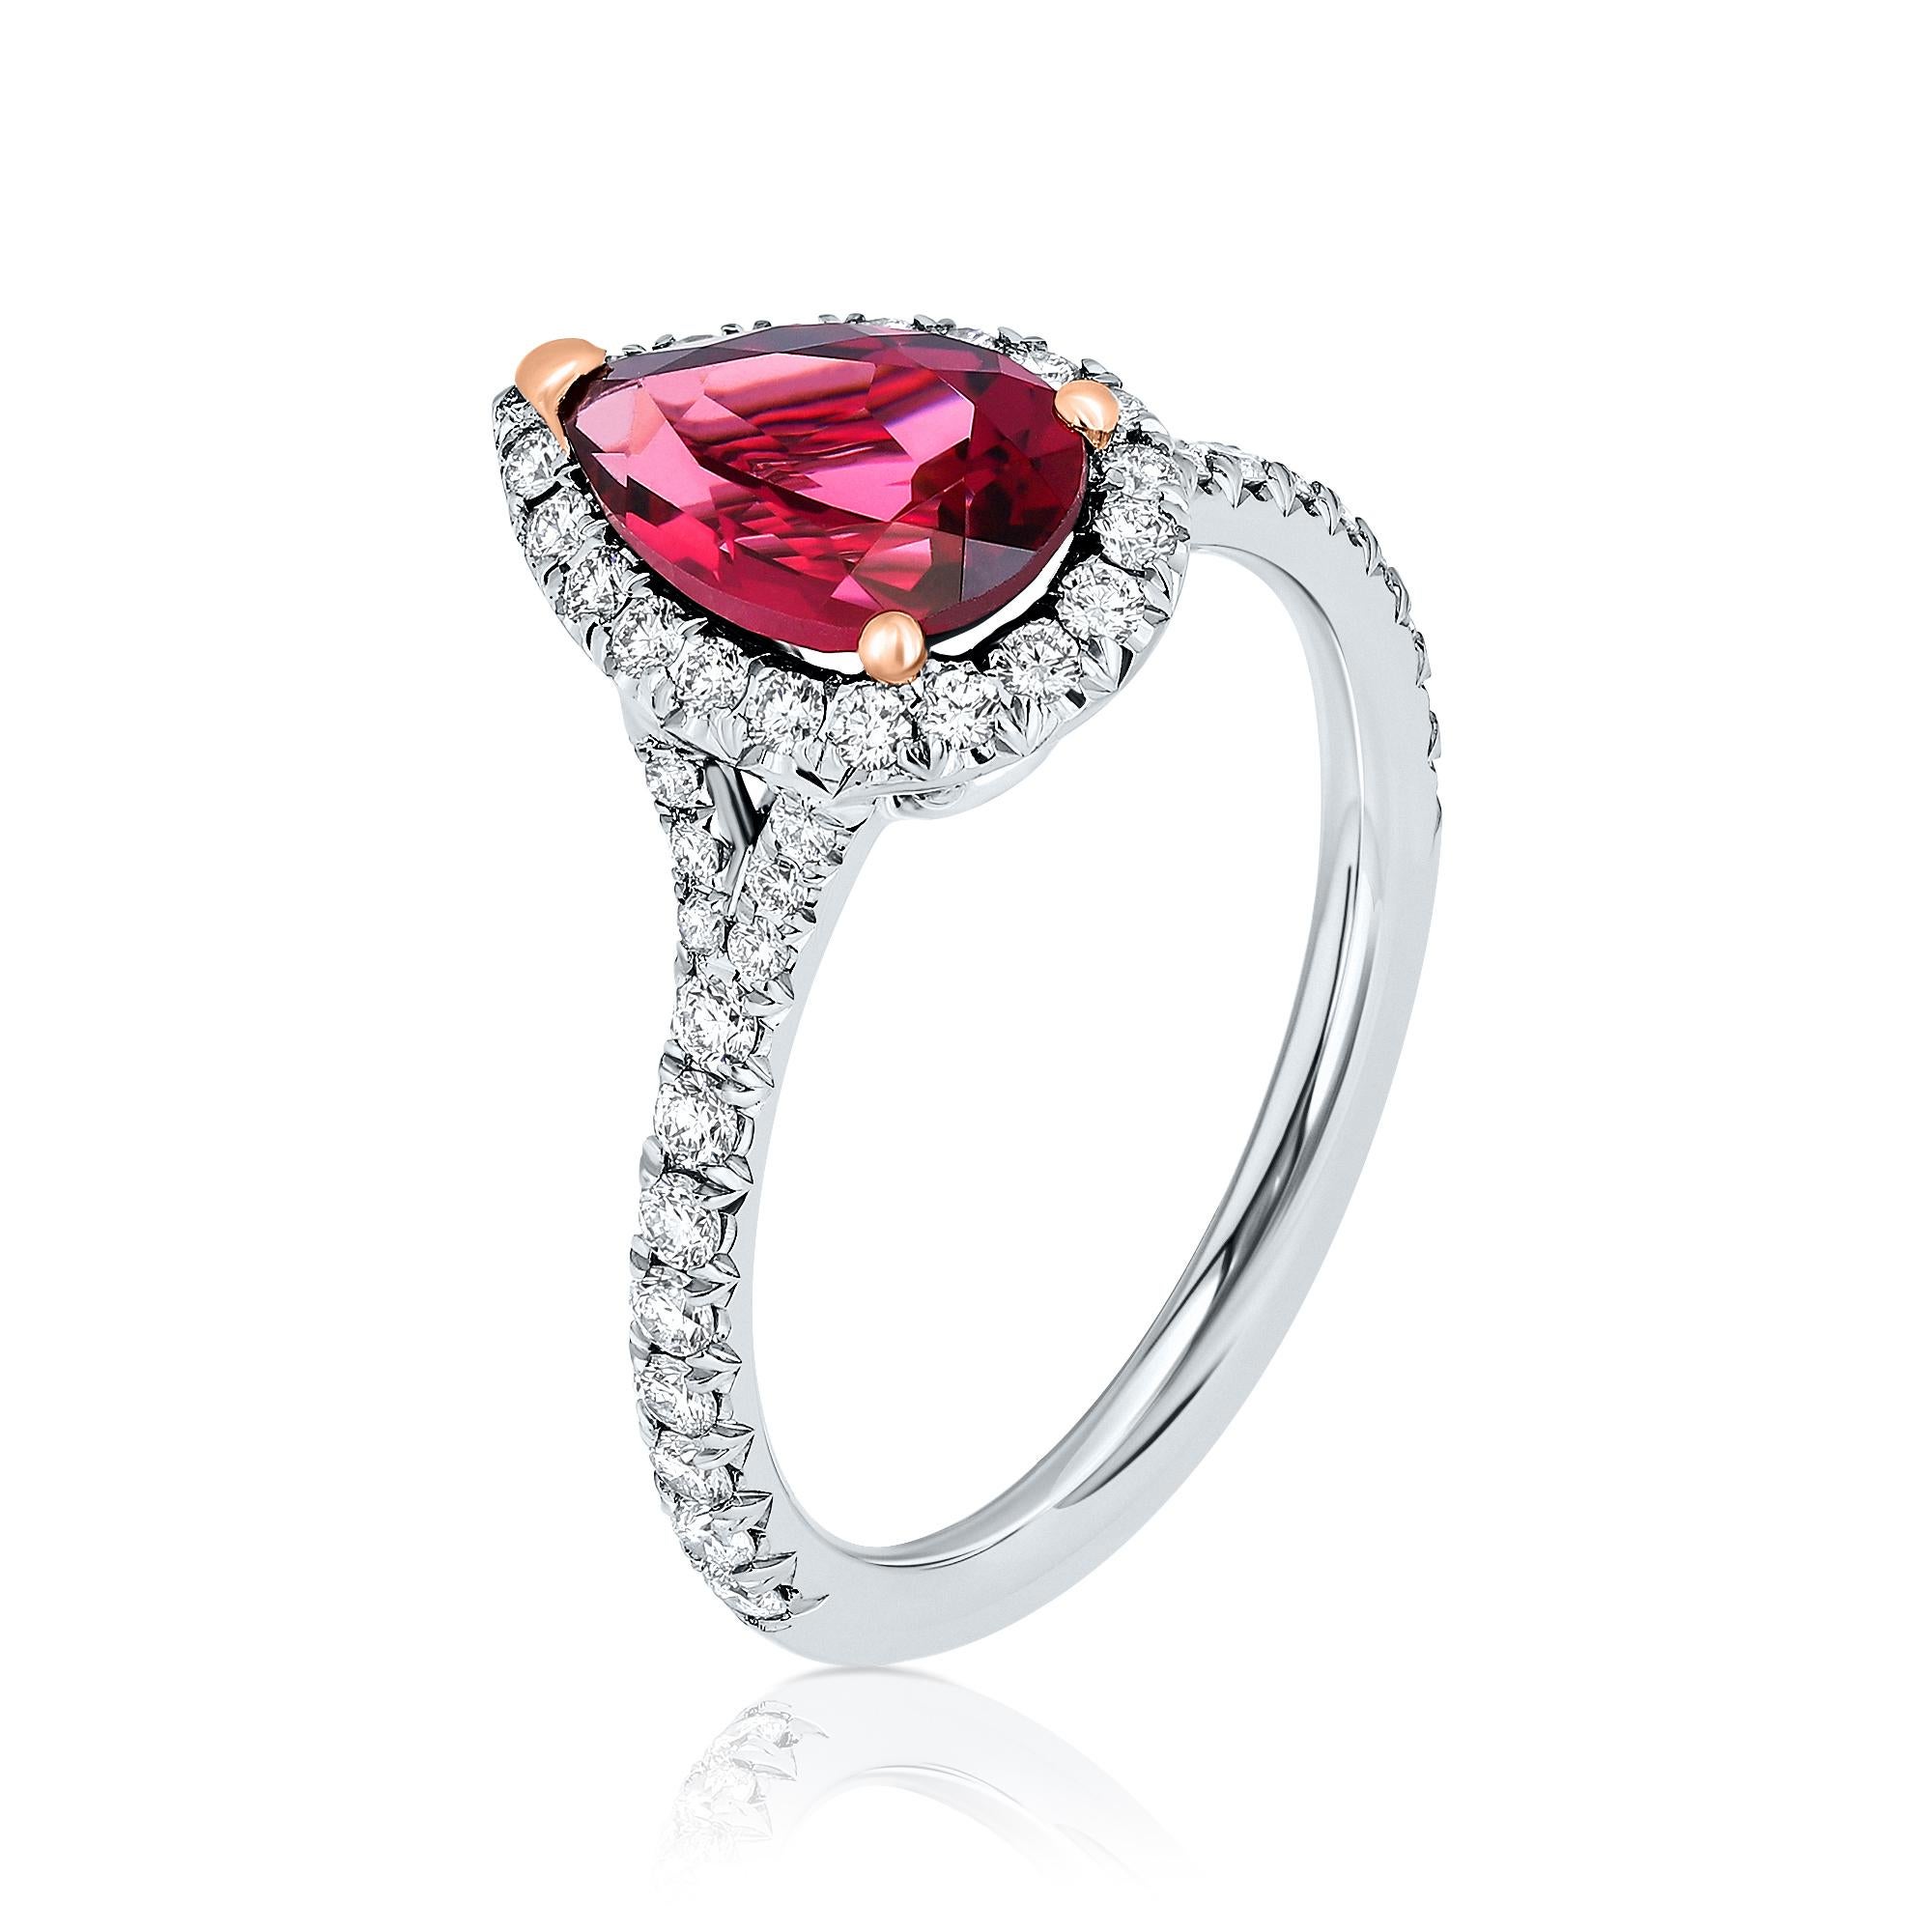 Baroque 2.33 Carat Red Pear Tourmaline & Diamond Halo Cocktail Ring, set in Platinum. For Sale